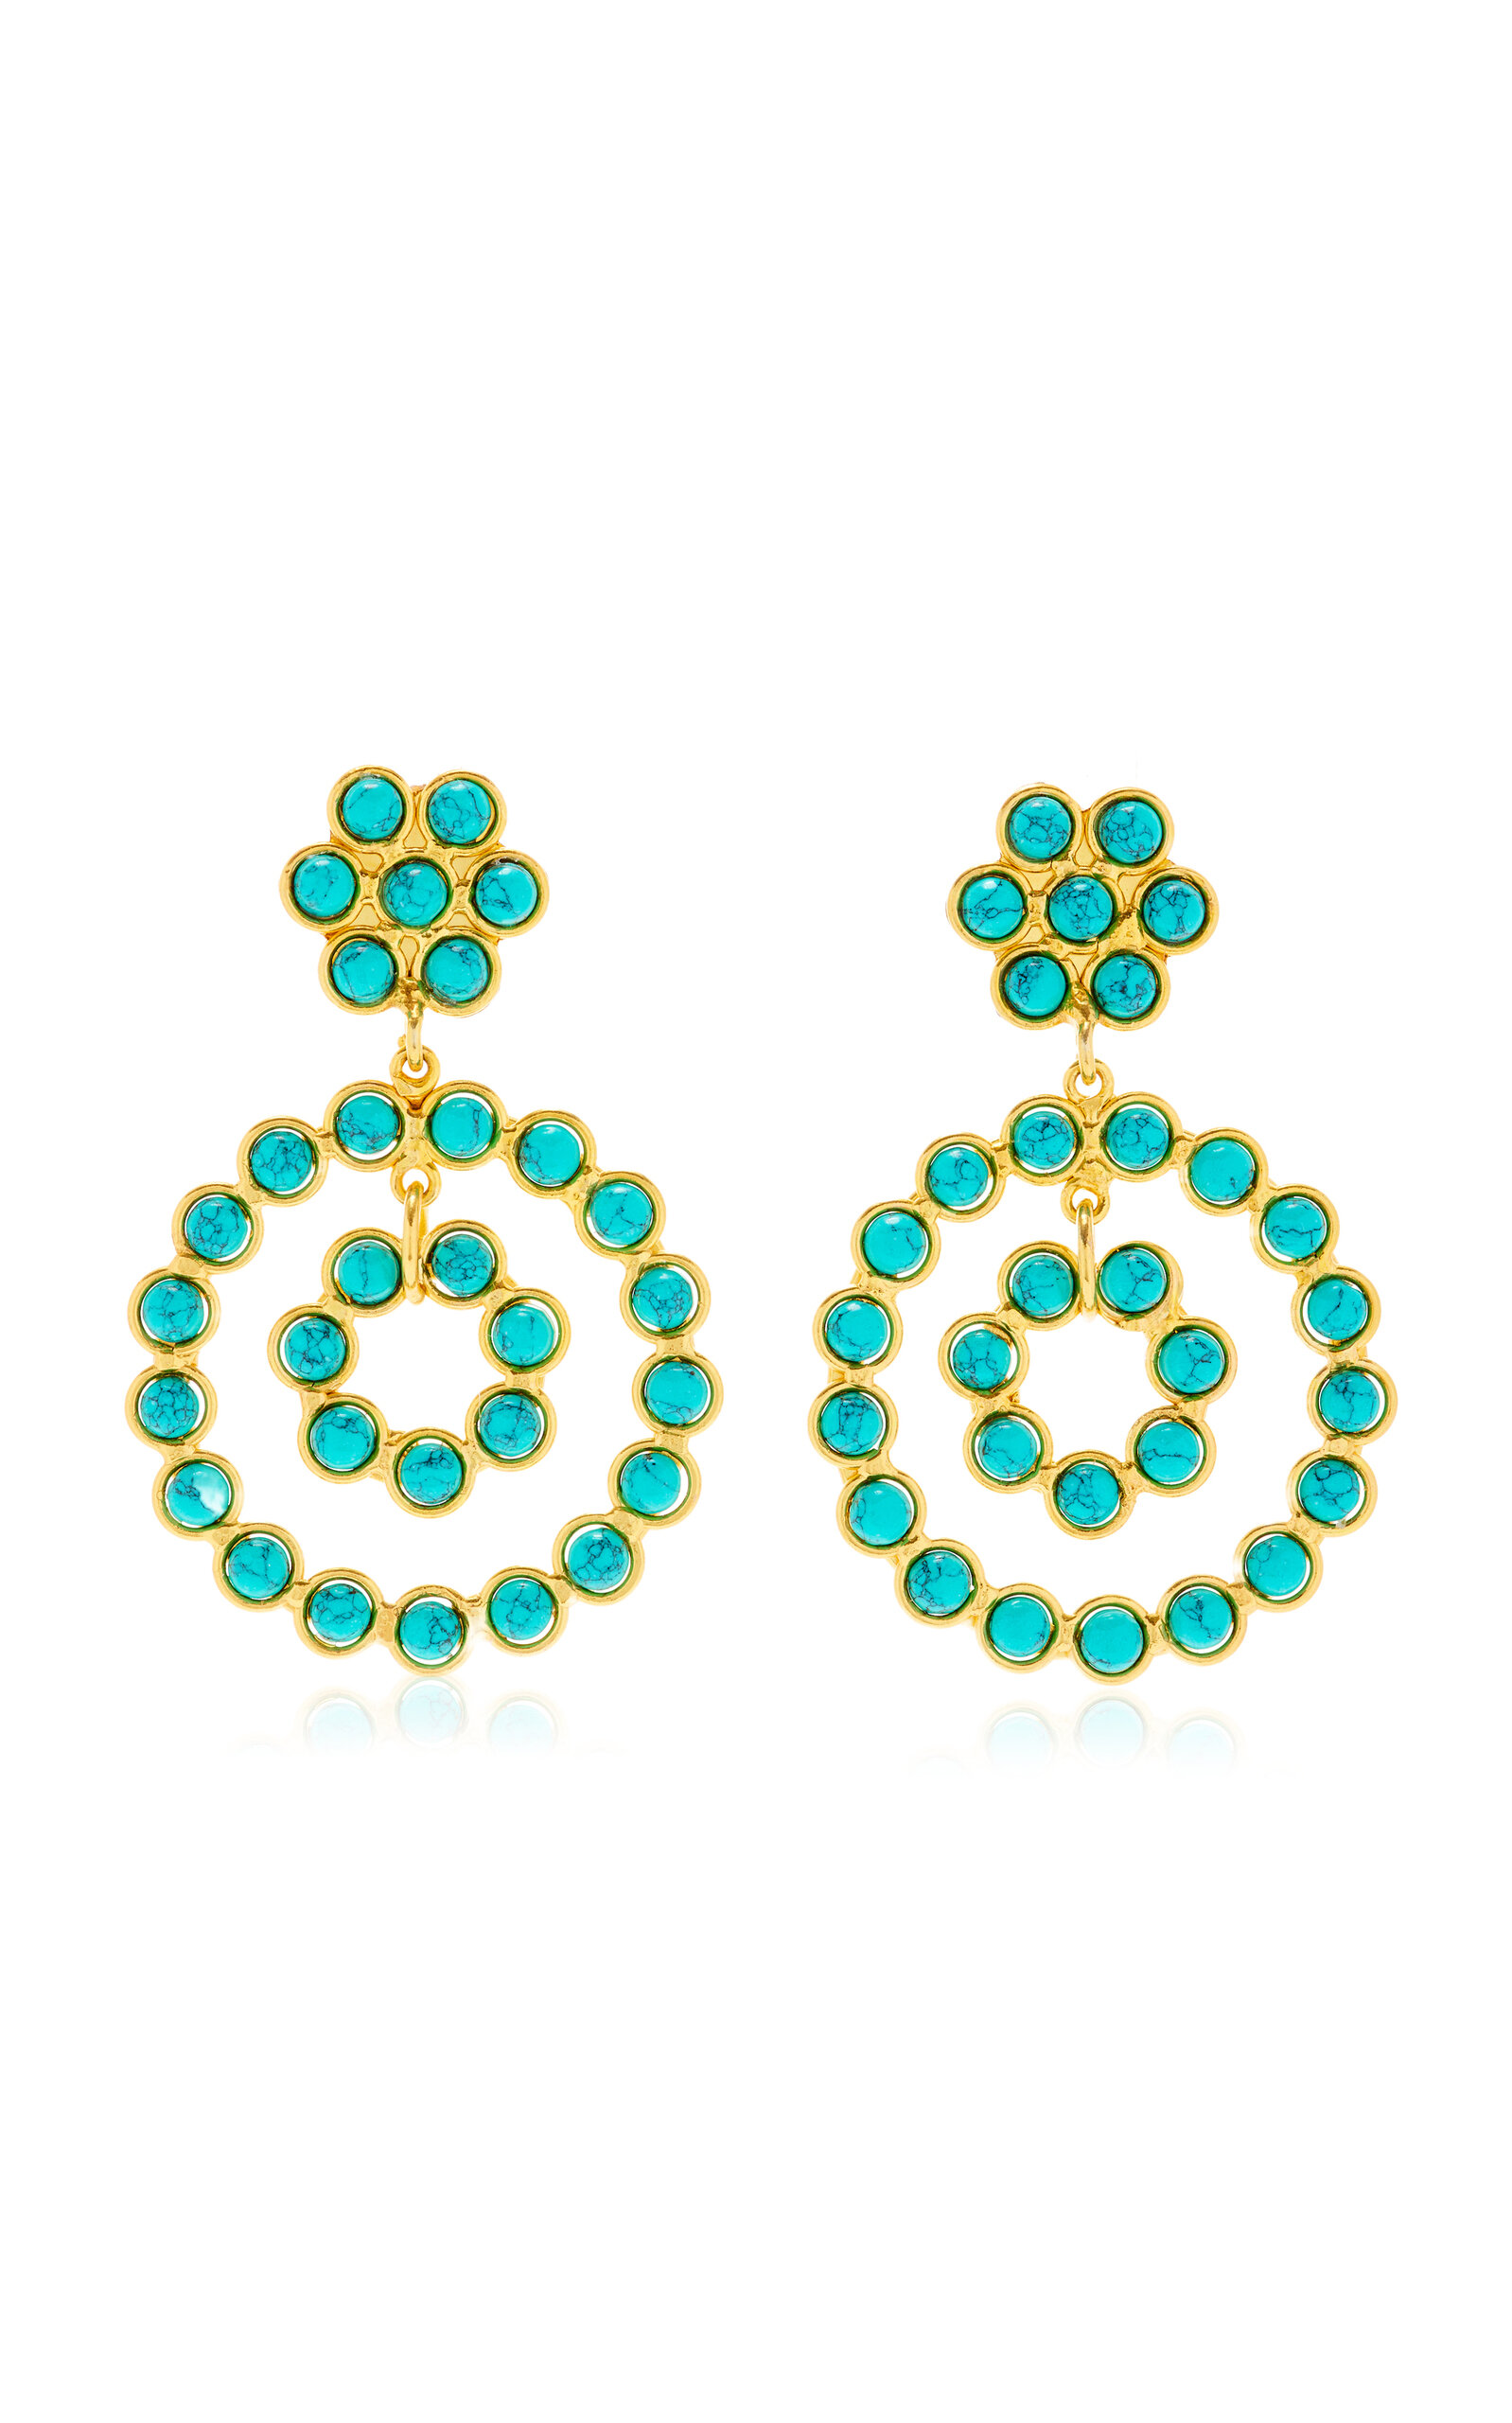 Sylvia Toledano Happy Flower 22k Gold-plated Turquoise Earrings In Blue